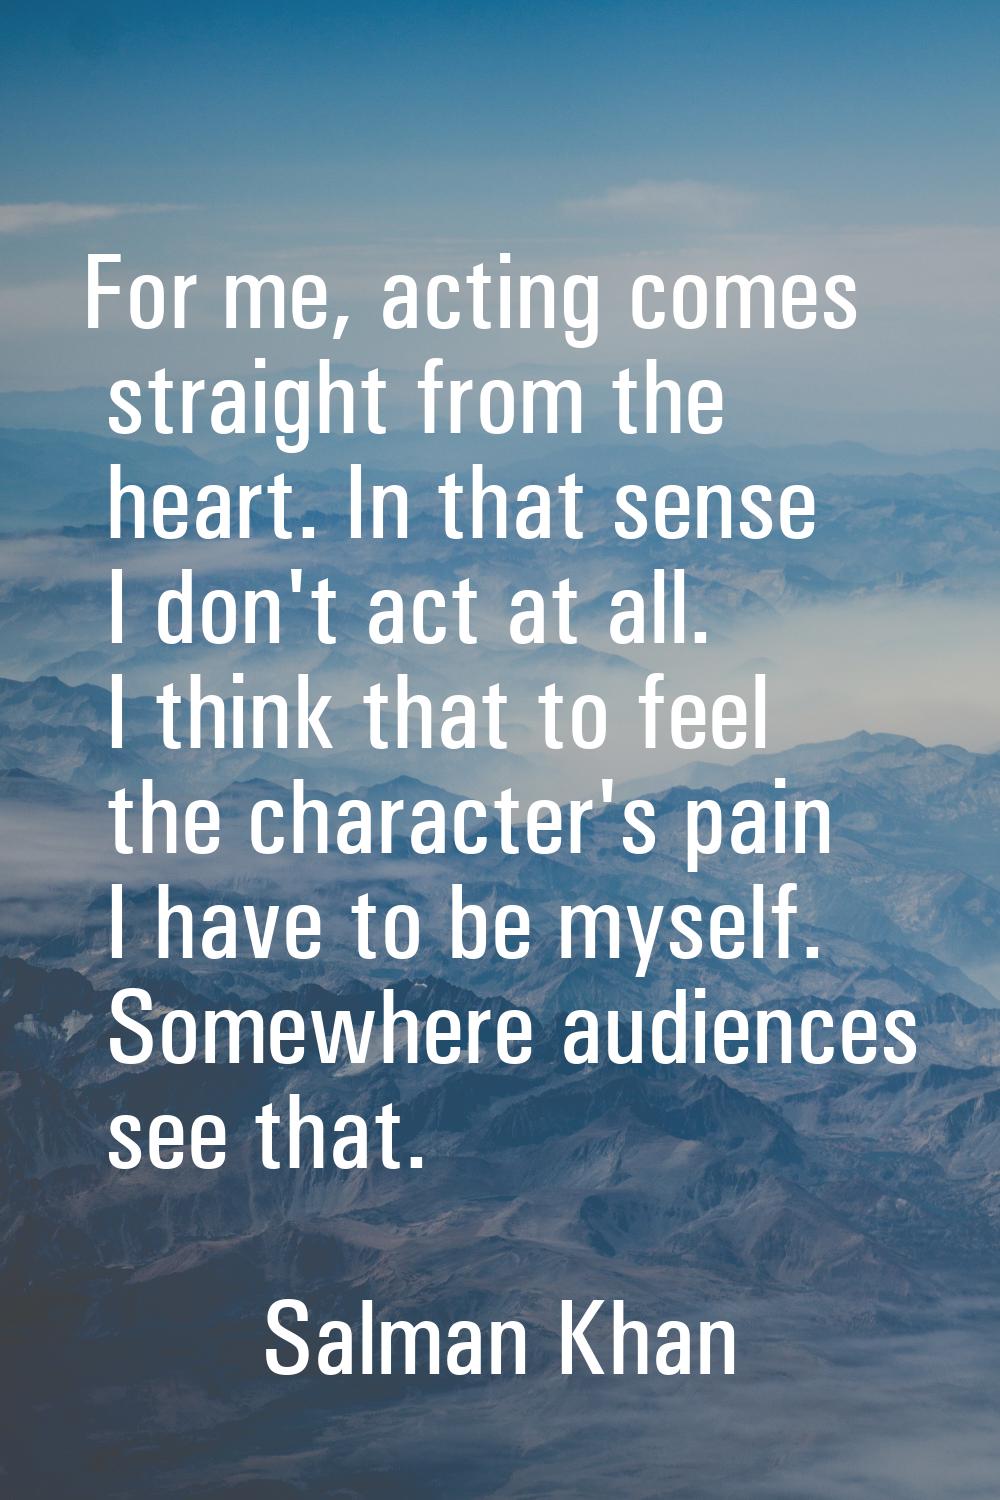 For me, acting comes straight from the heart. In that sense I don't act at all. I think that to fee